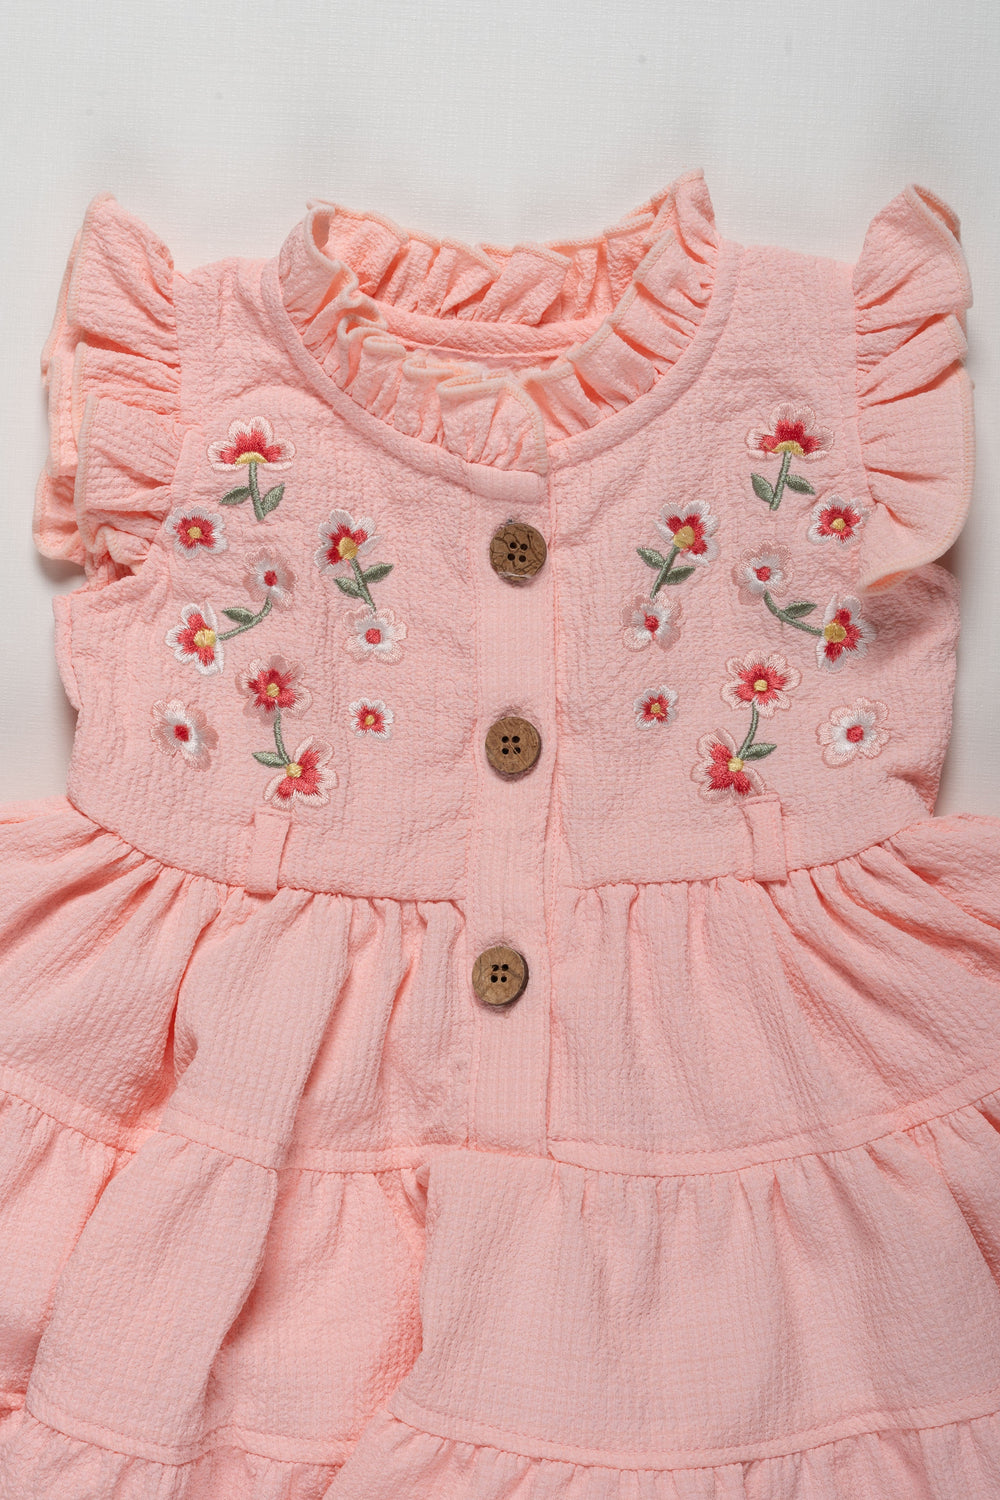 The Nesavu Girls Cotton Frock Adorable Girls Pink Cotton Ruffle Frock with Floral Embroidery Nesavu Adorable Girls Pink Cotton Ruffle Frock with Floral Embroidery | The Nesavu